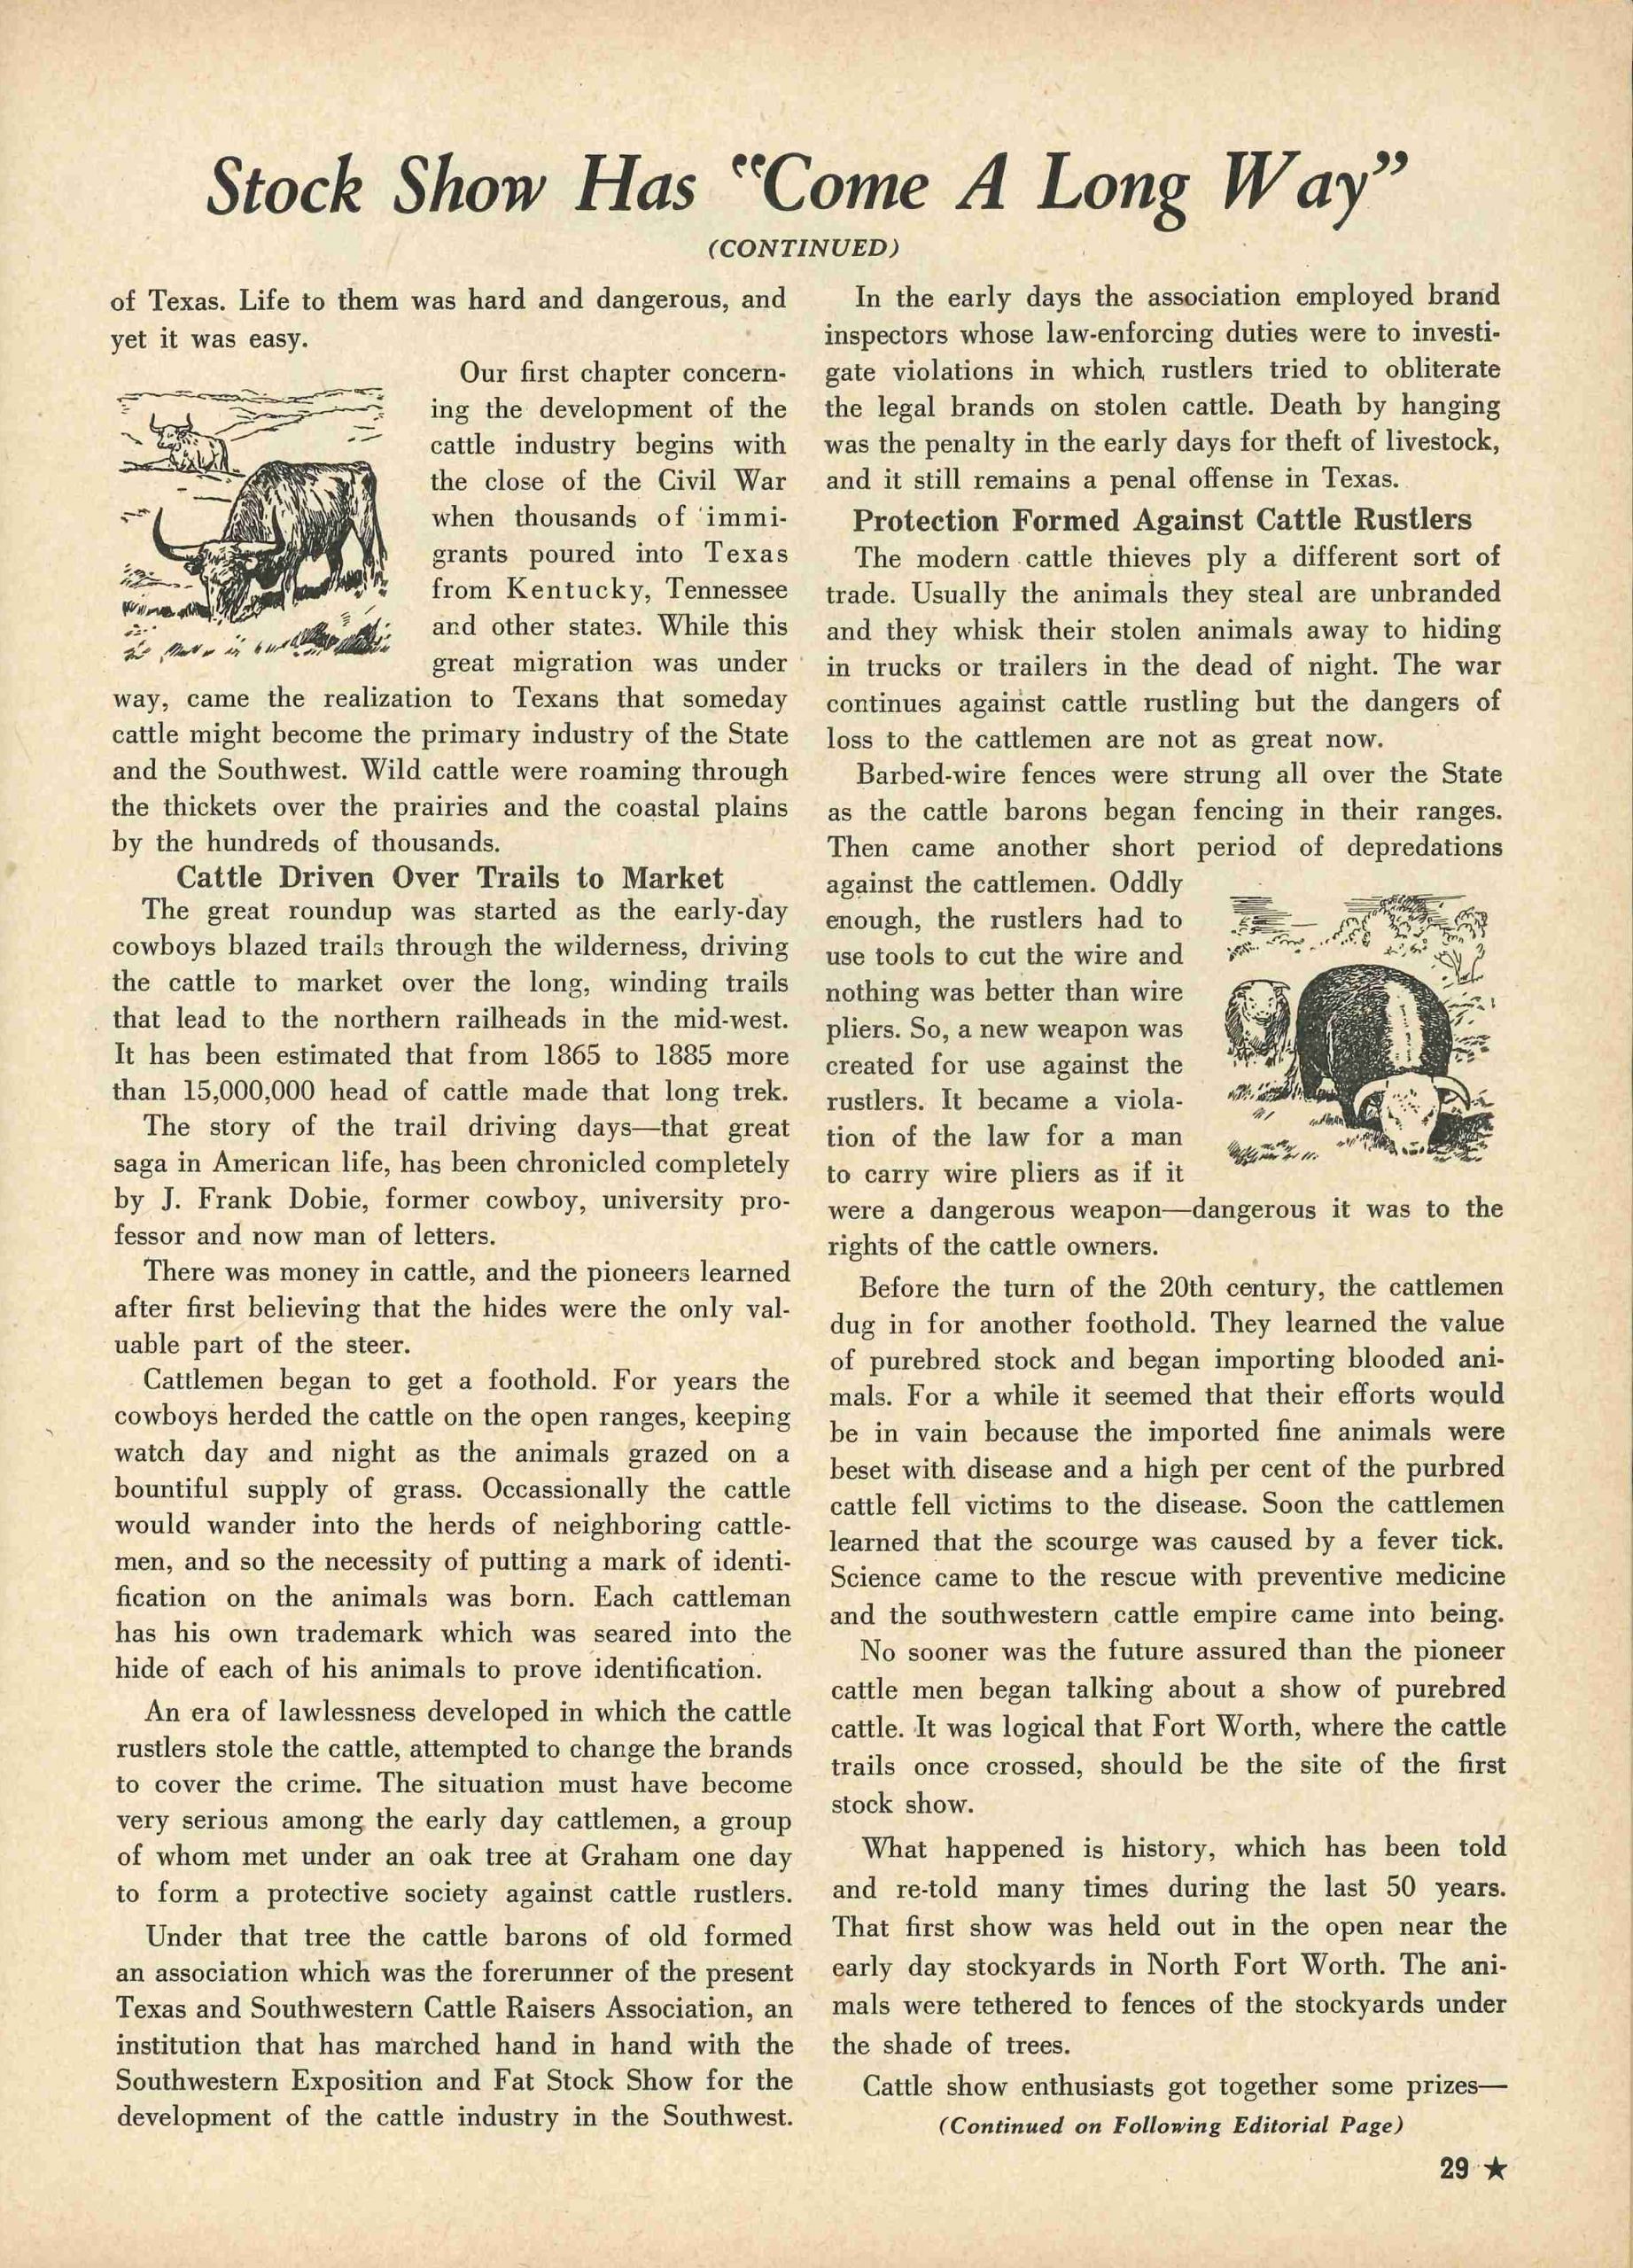 Second page of essay from stock show annual about its history